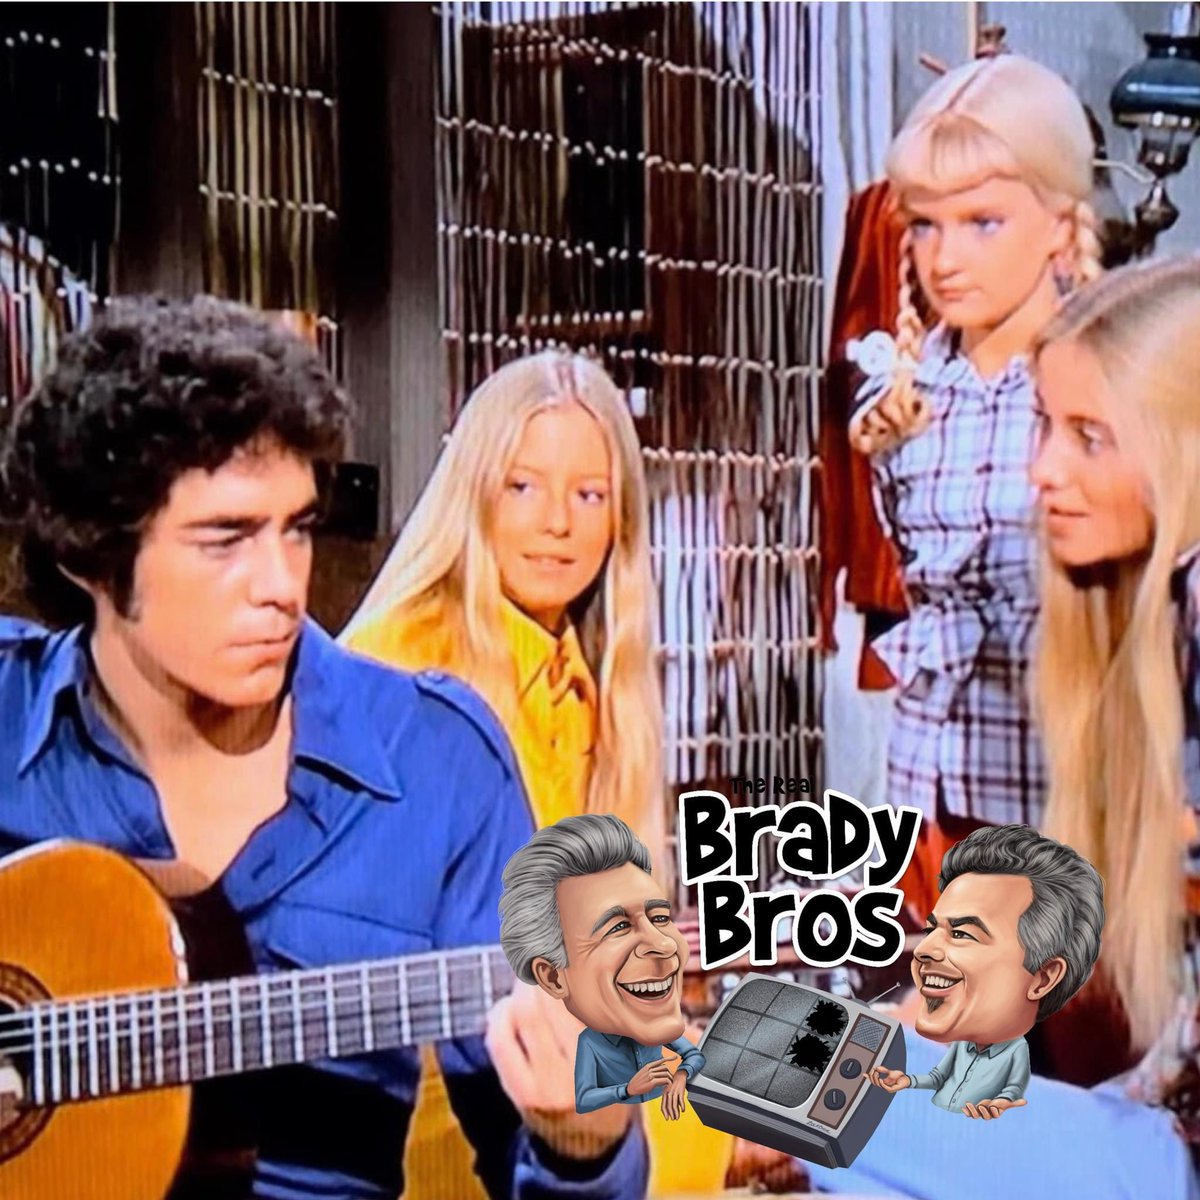 Listen to 'Adios, Johnny Bravo - Part 2' here apple.co/3IF7y4X.
⁠
Follow the podcast on Facebook  @The Real Brady Bros⁠
⁠
#PeterBrady #porkchopsandapplesauce #thebradybunch #realbradybros #therealbradybros #GregBrady #BarryWilliams